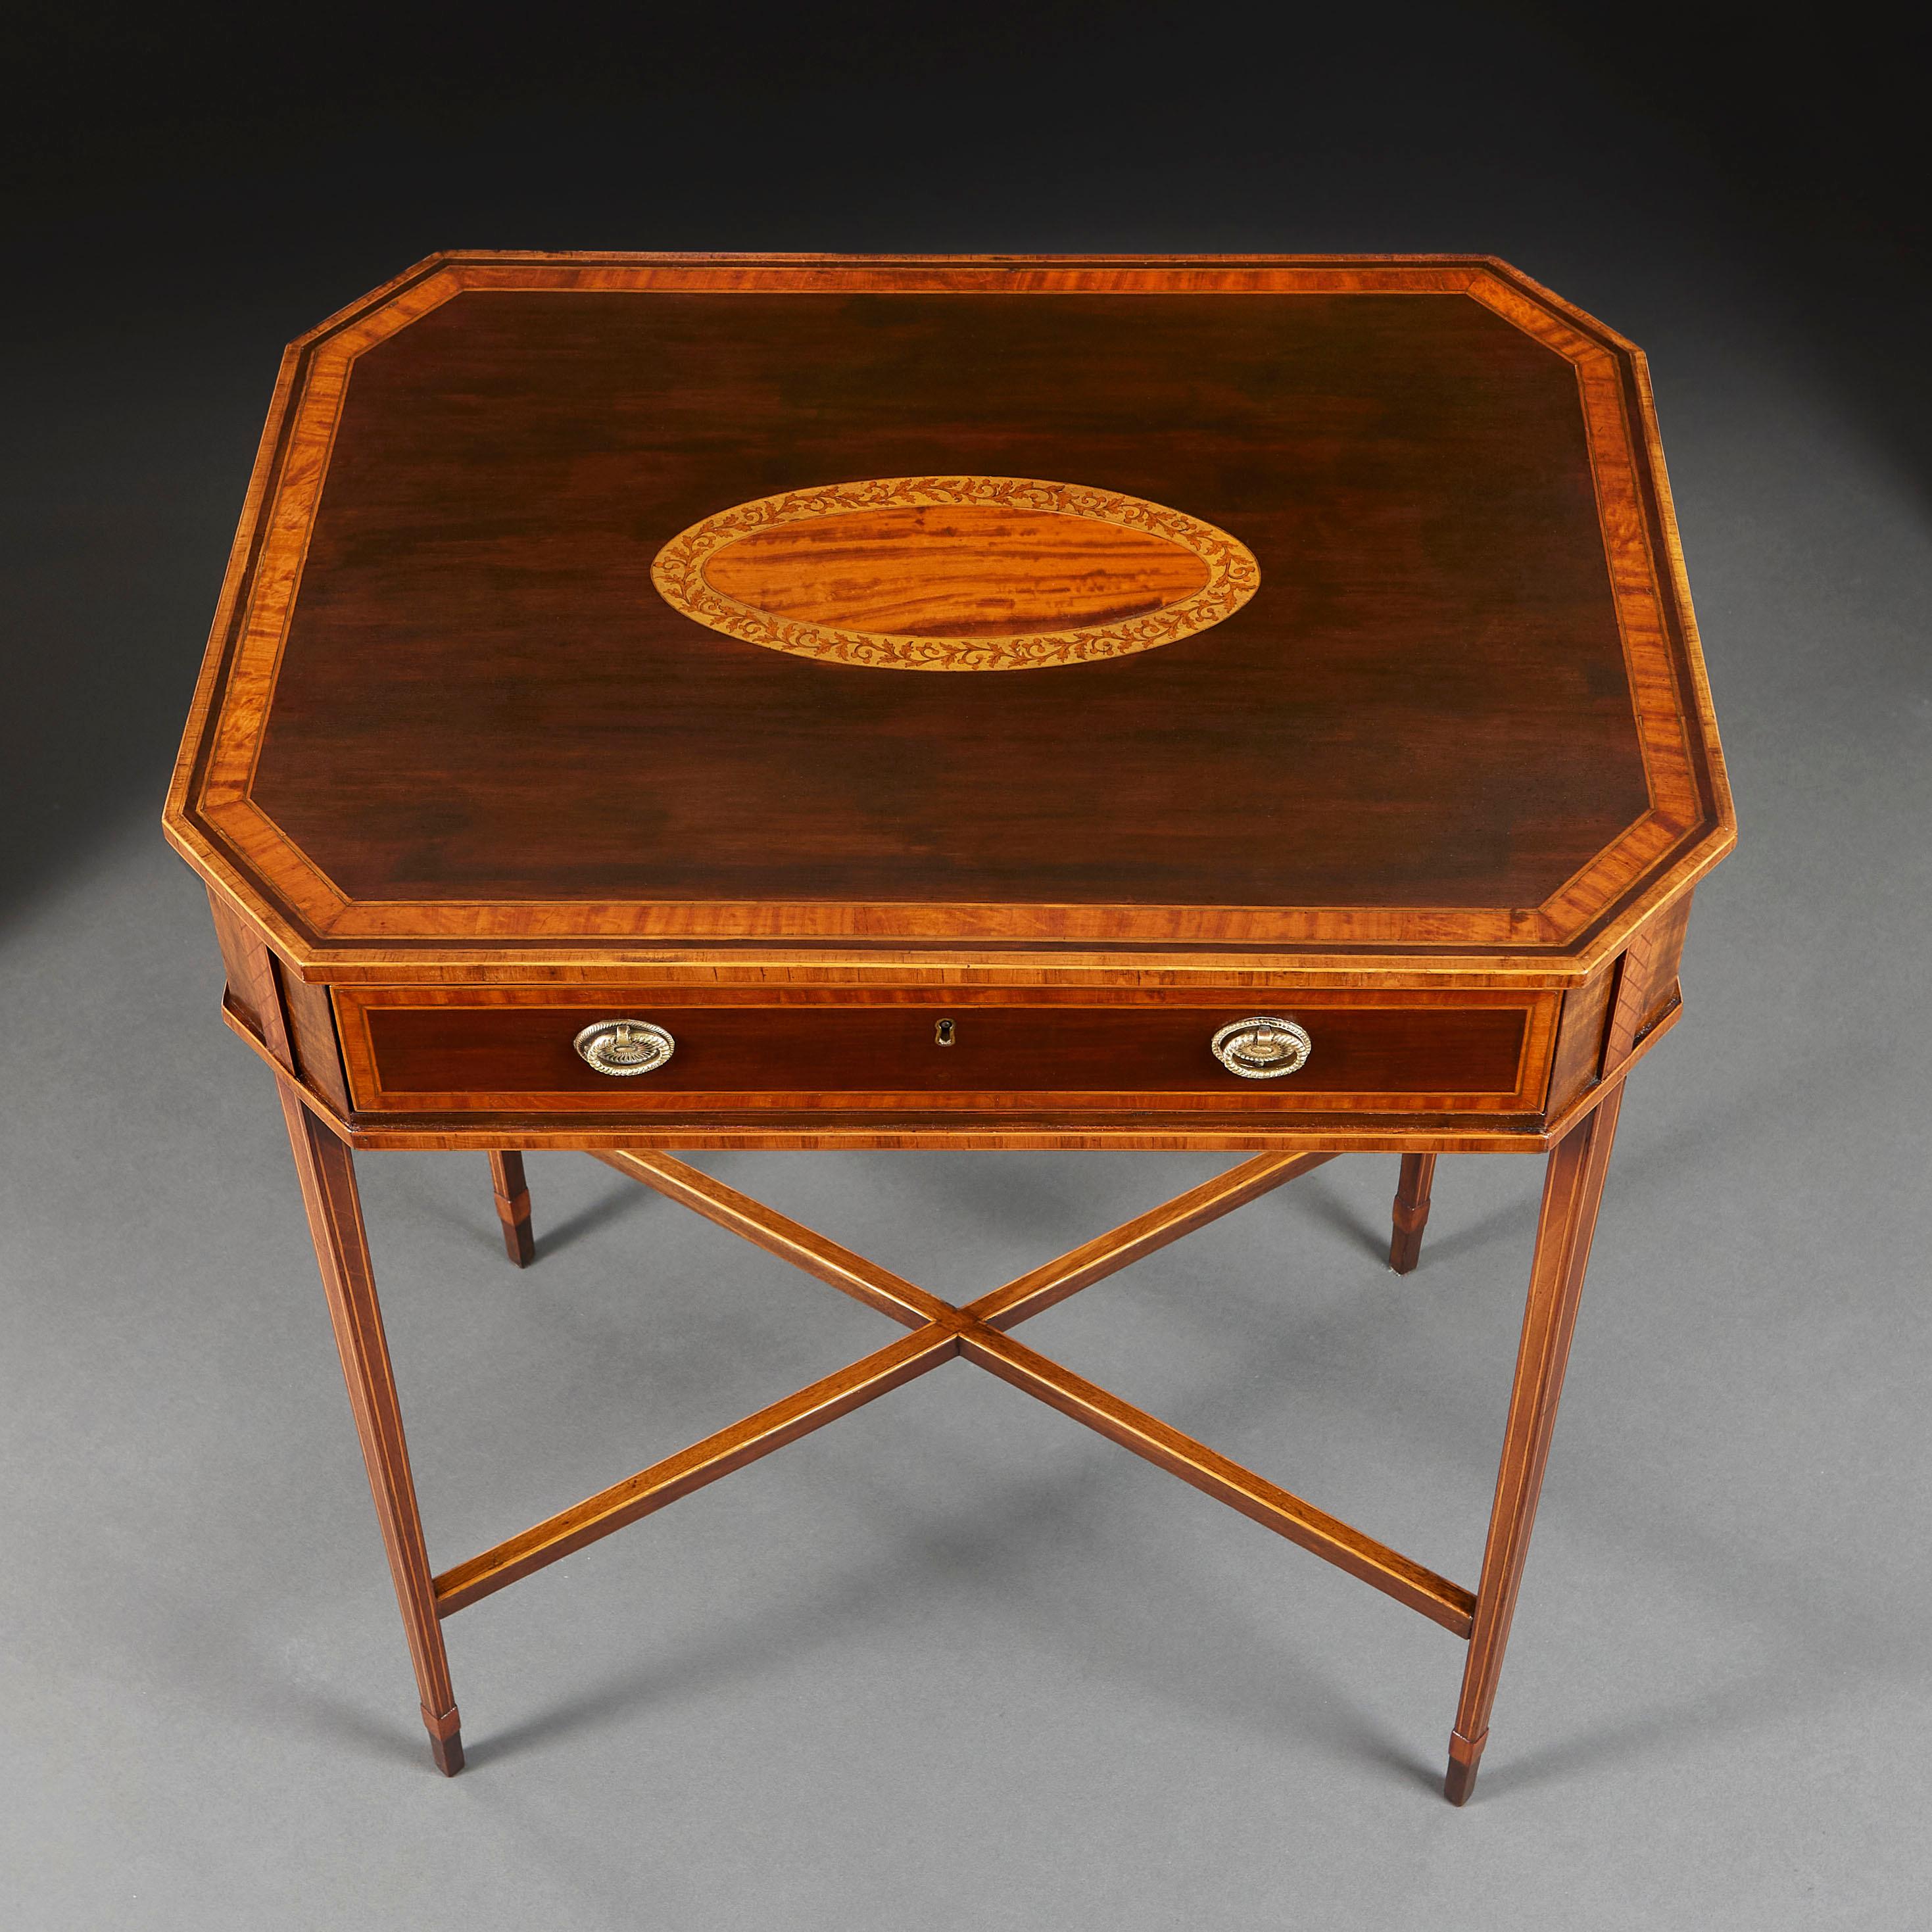 A fine late eighteenth century occasional table, the top with canted sides, constructed from goncalo alves with oval cartouche inlaid with Ceylonese satinwood, surrounded by a banding of interlocking leaves, with single drawer retaining the original